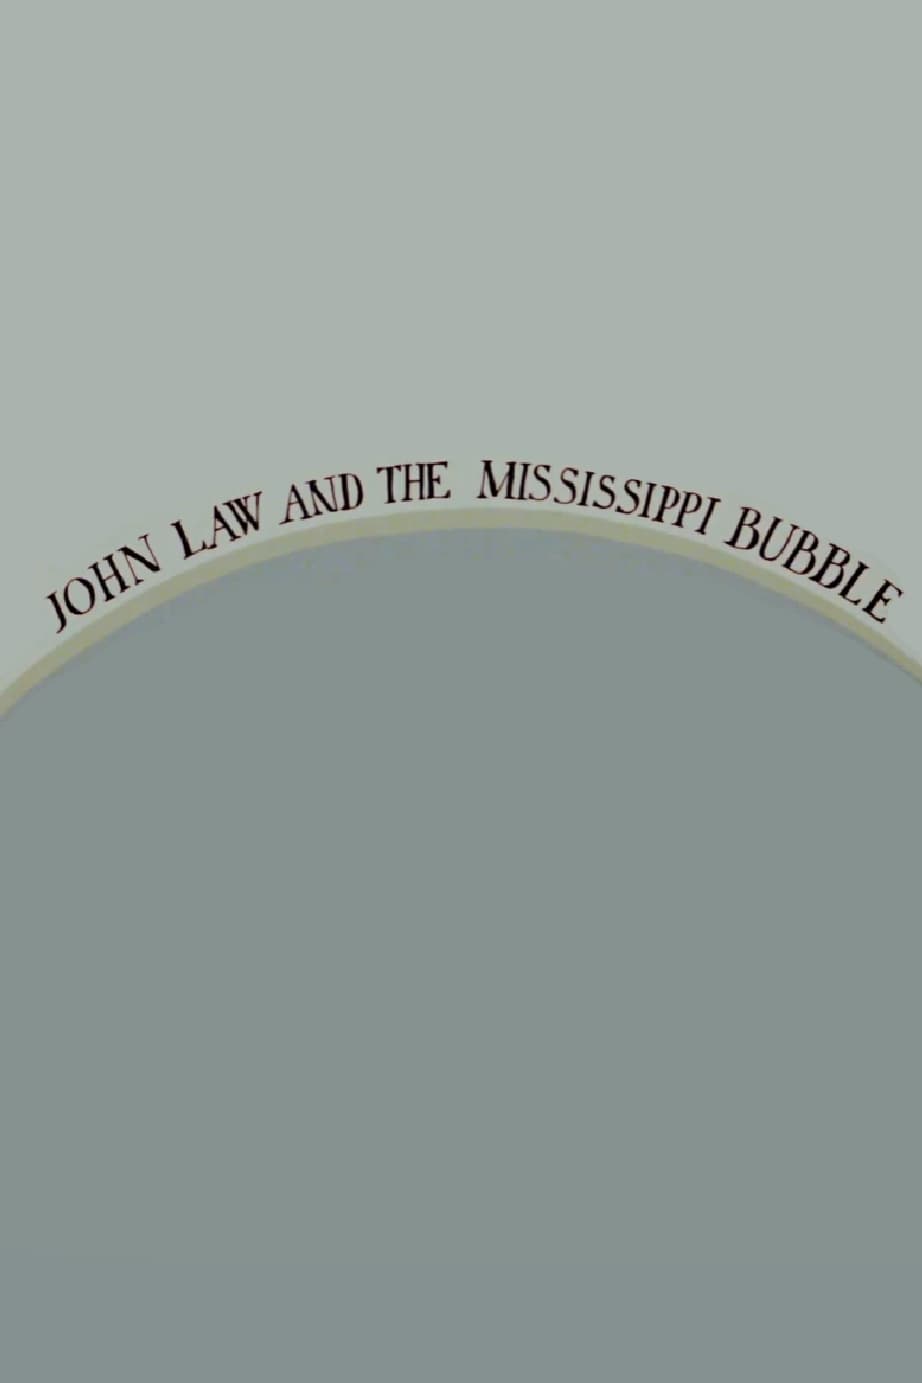 John Law and the Mississippi Bubble